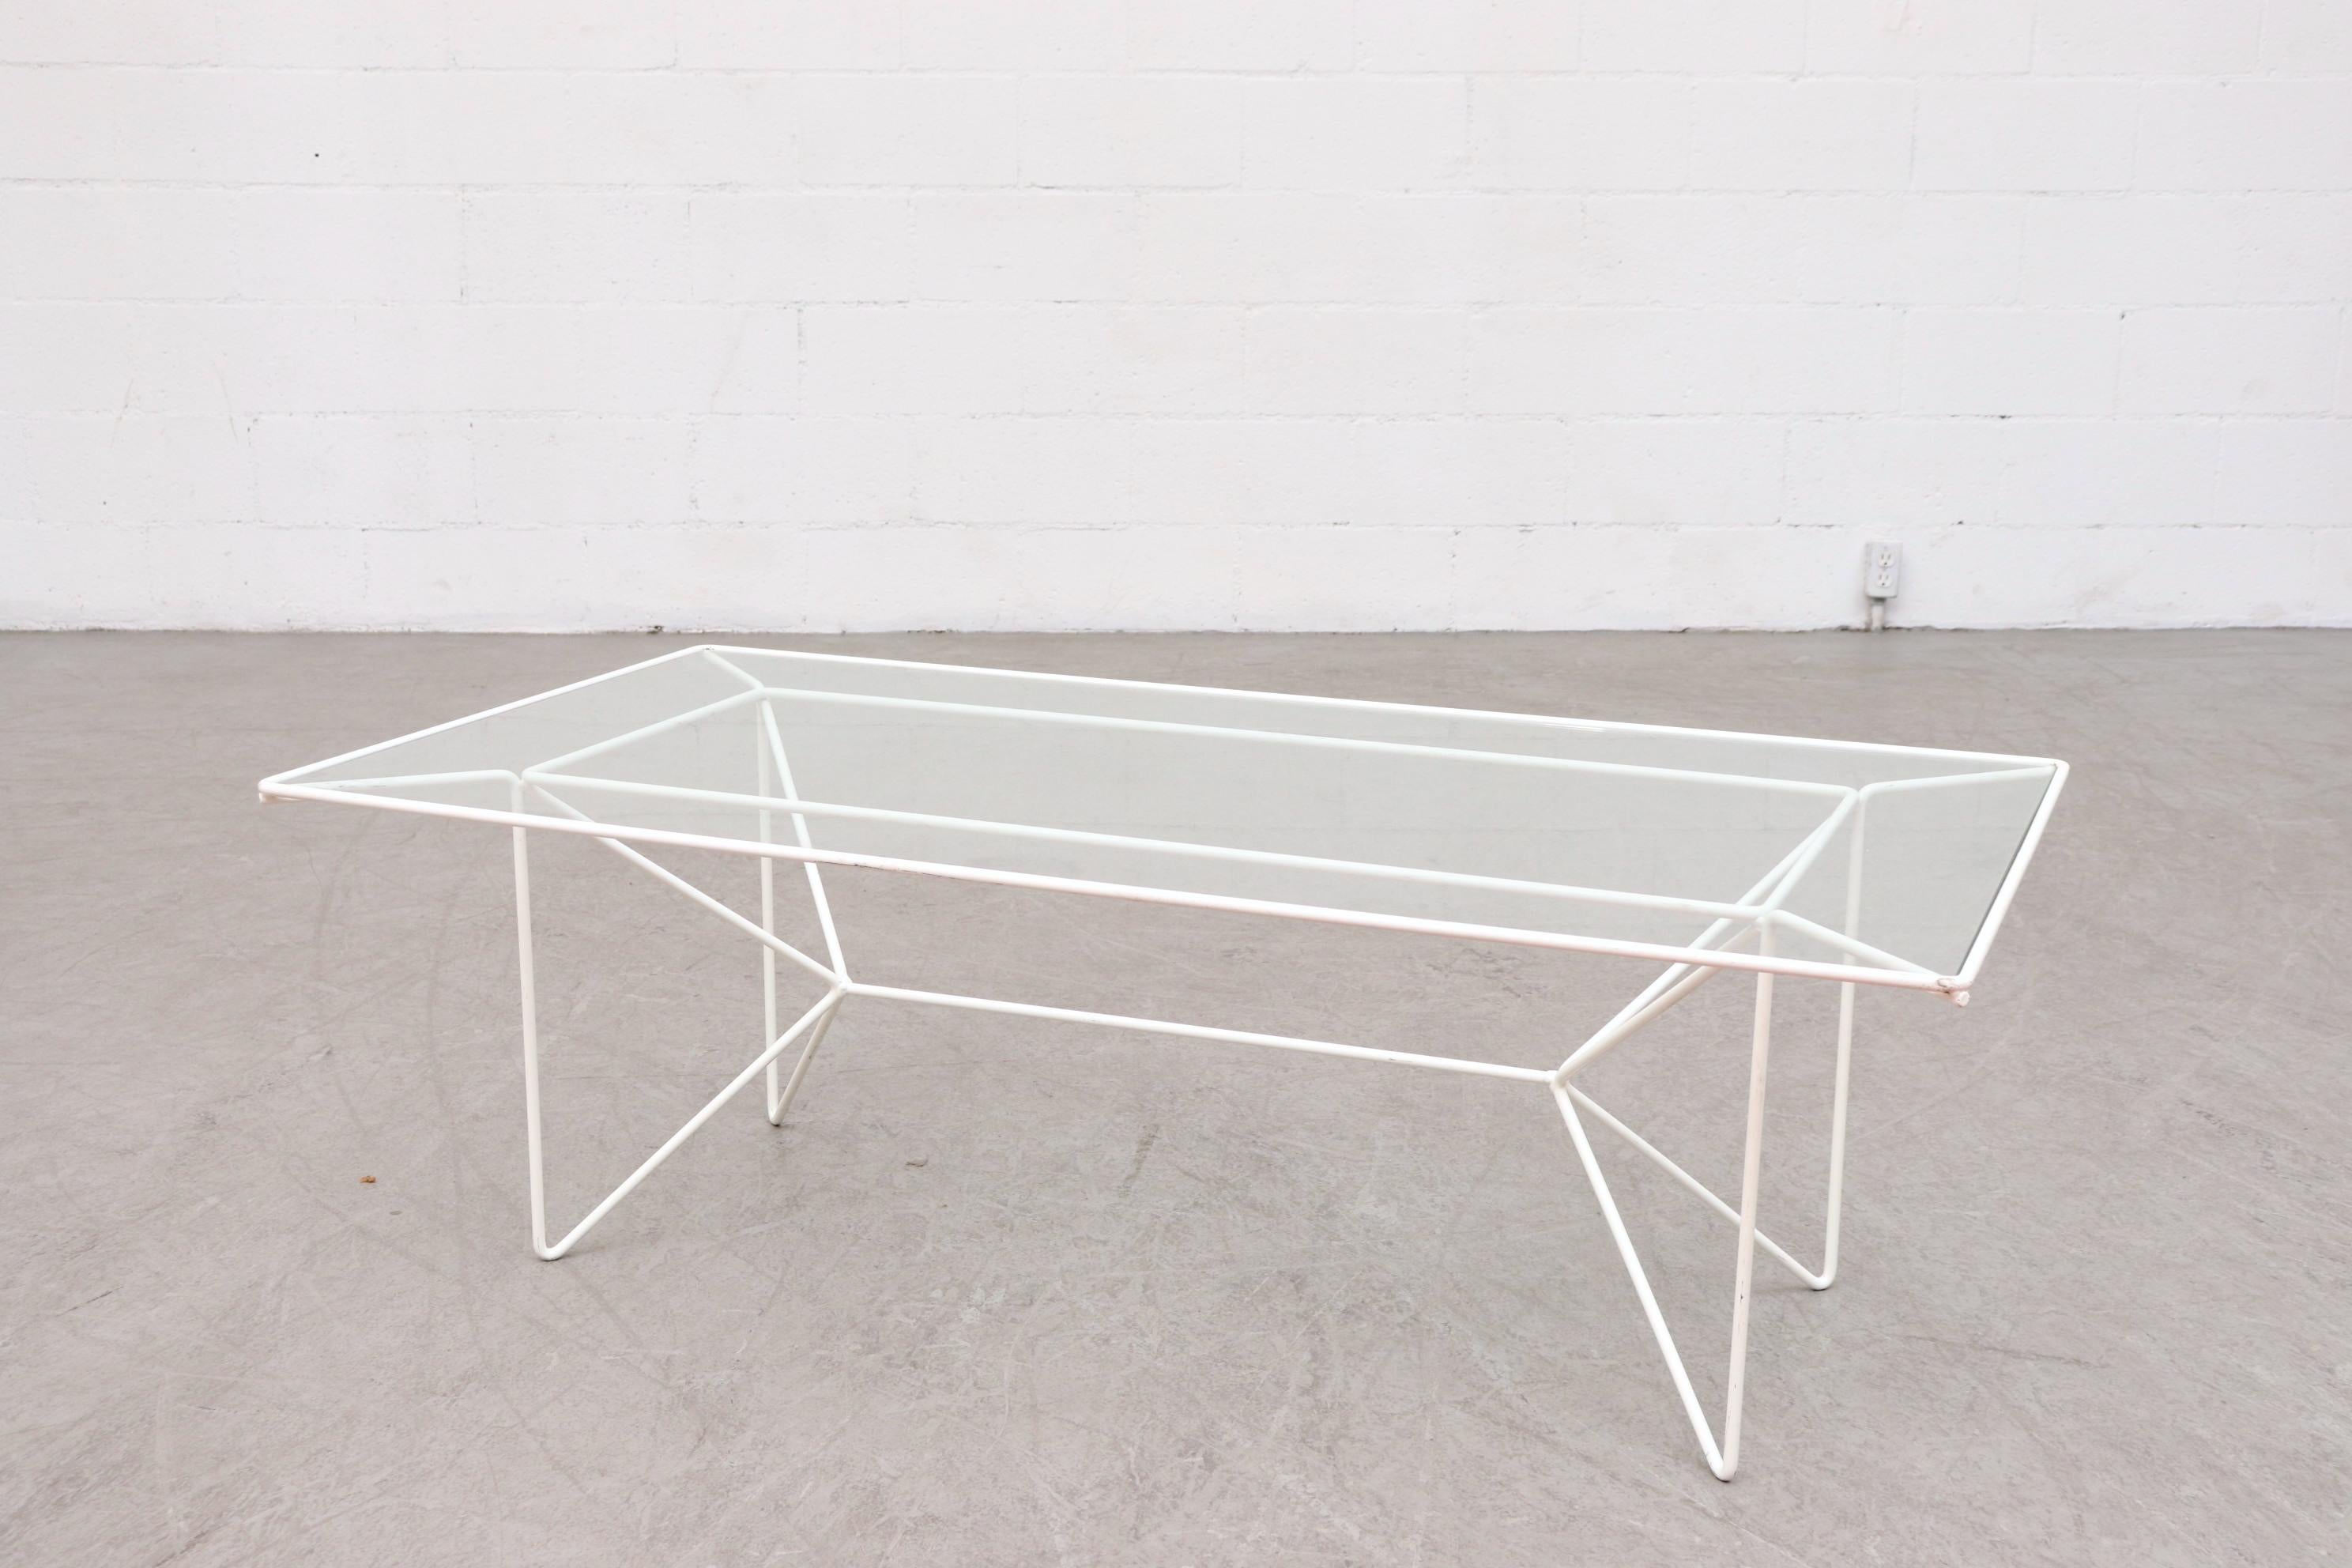 A. Bueno de Mesquita inspired white wire coffee table. White enameled metal wire frame, inset glass top. In original condition with visible signs of wear, minimal enamel loss. Wear is consistent with its age and use.